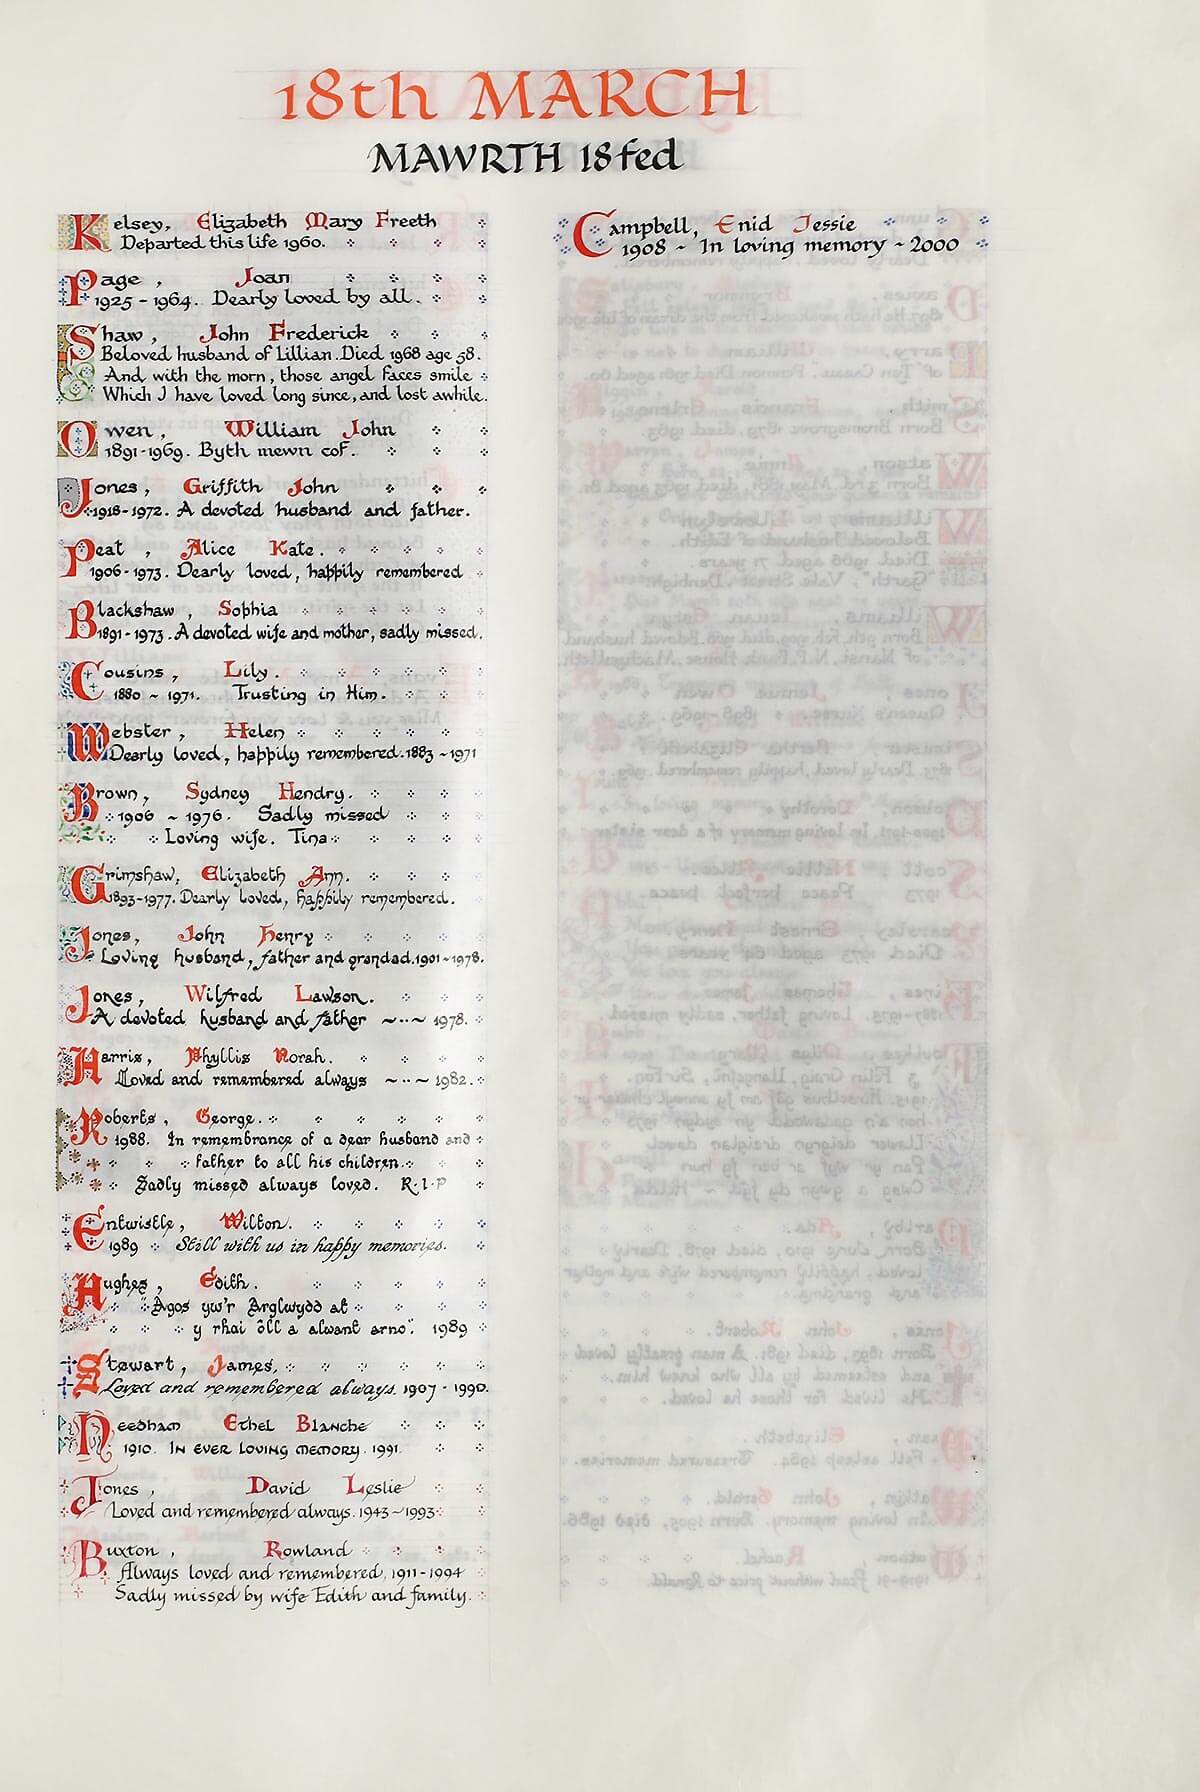 Page from the Book of Remembrance